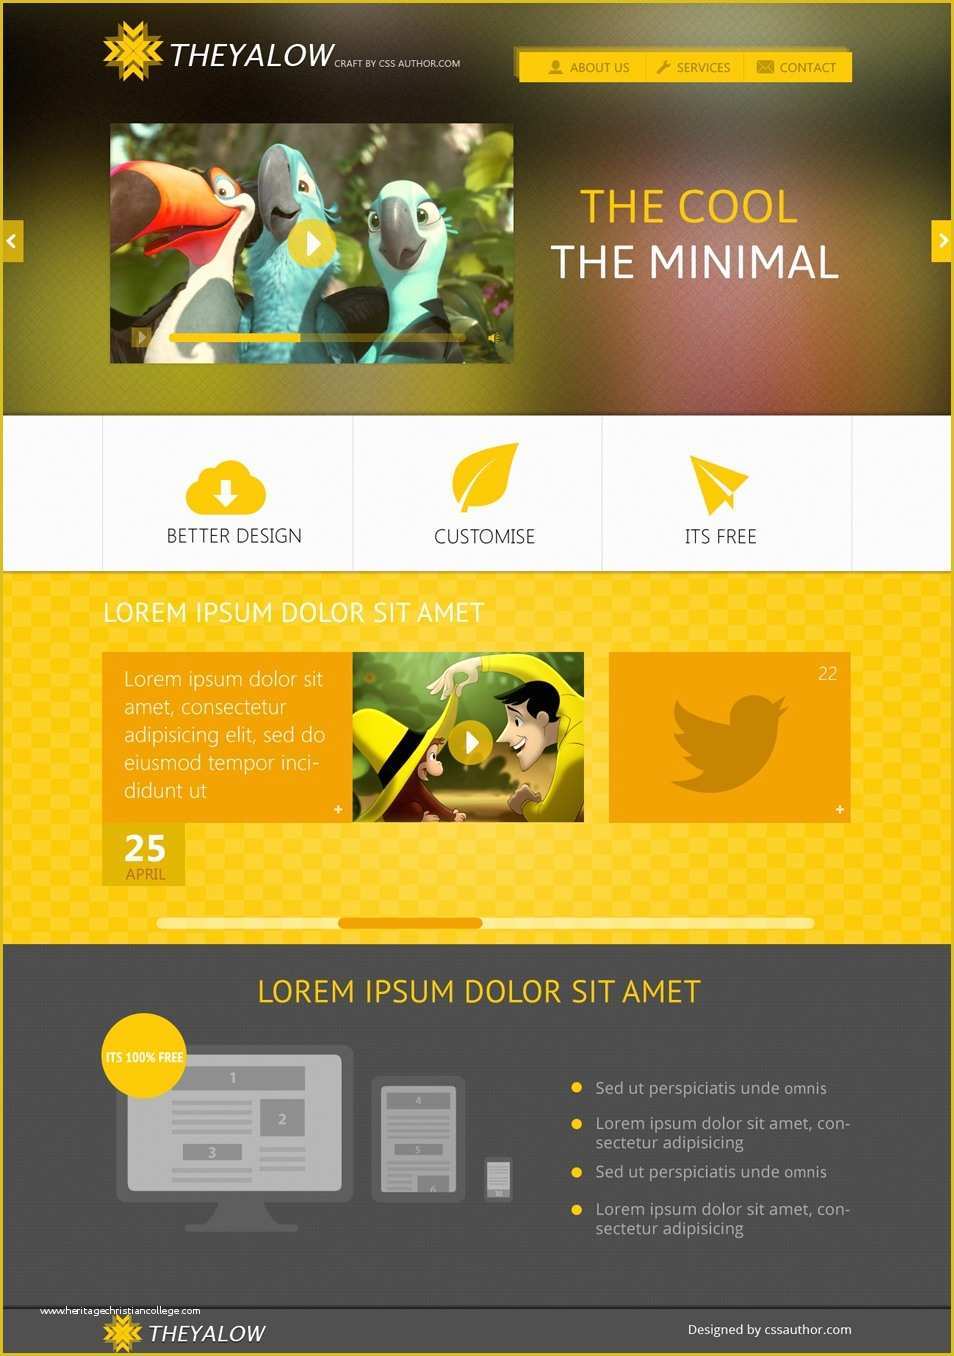 Free Author Website Templates Of theyalow A Responsive Web Design Template Psd for Free